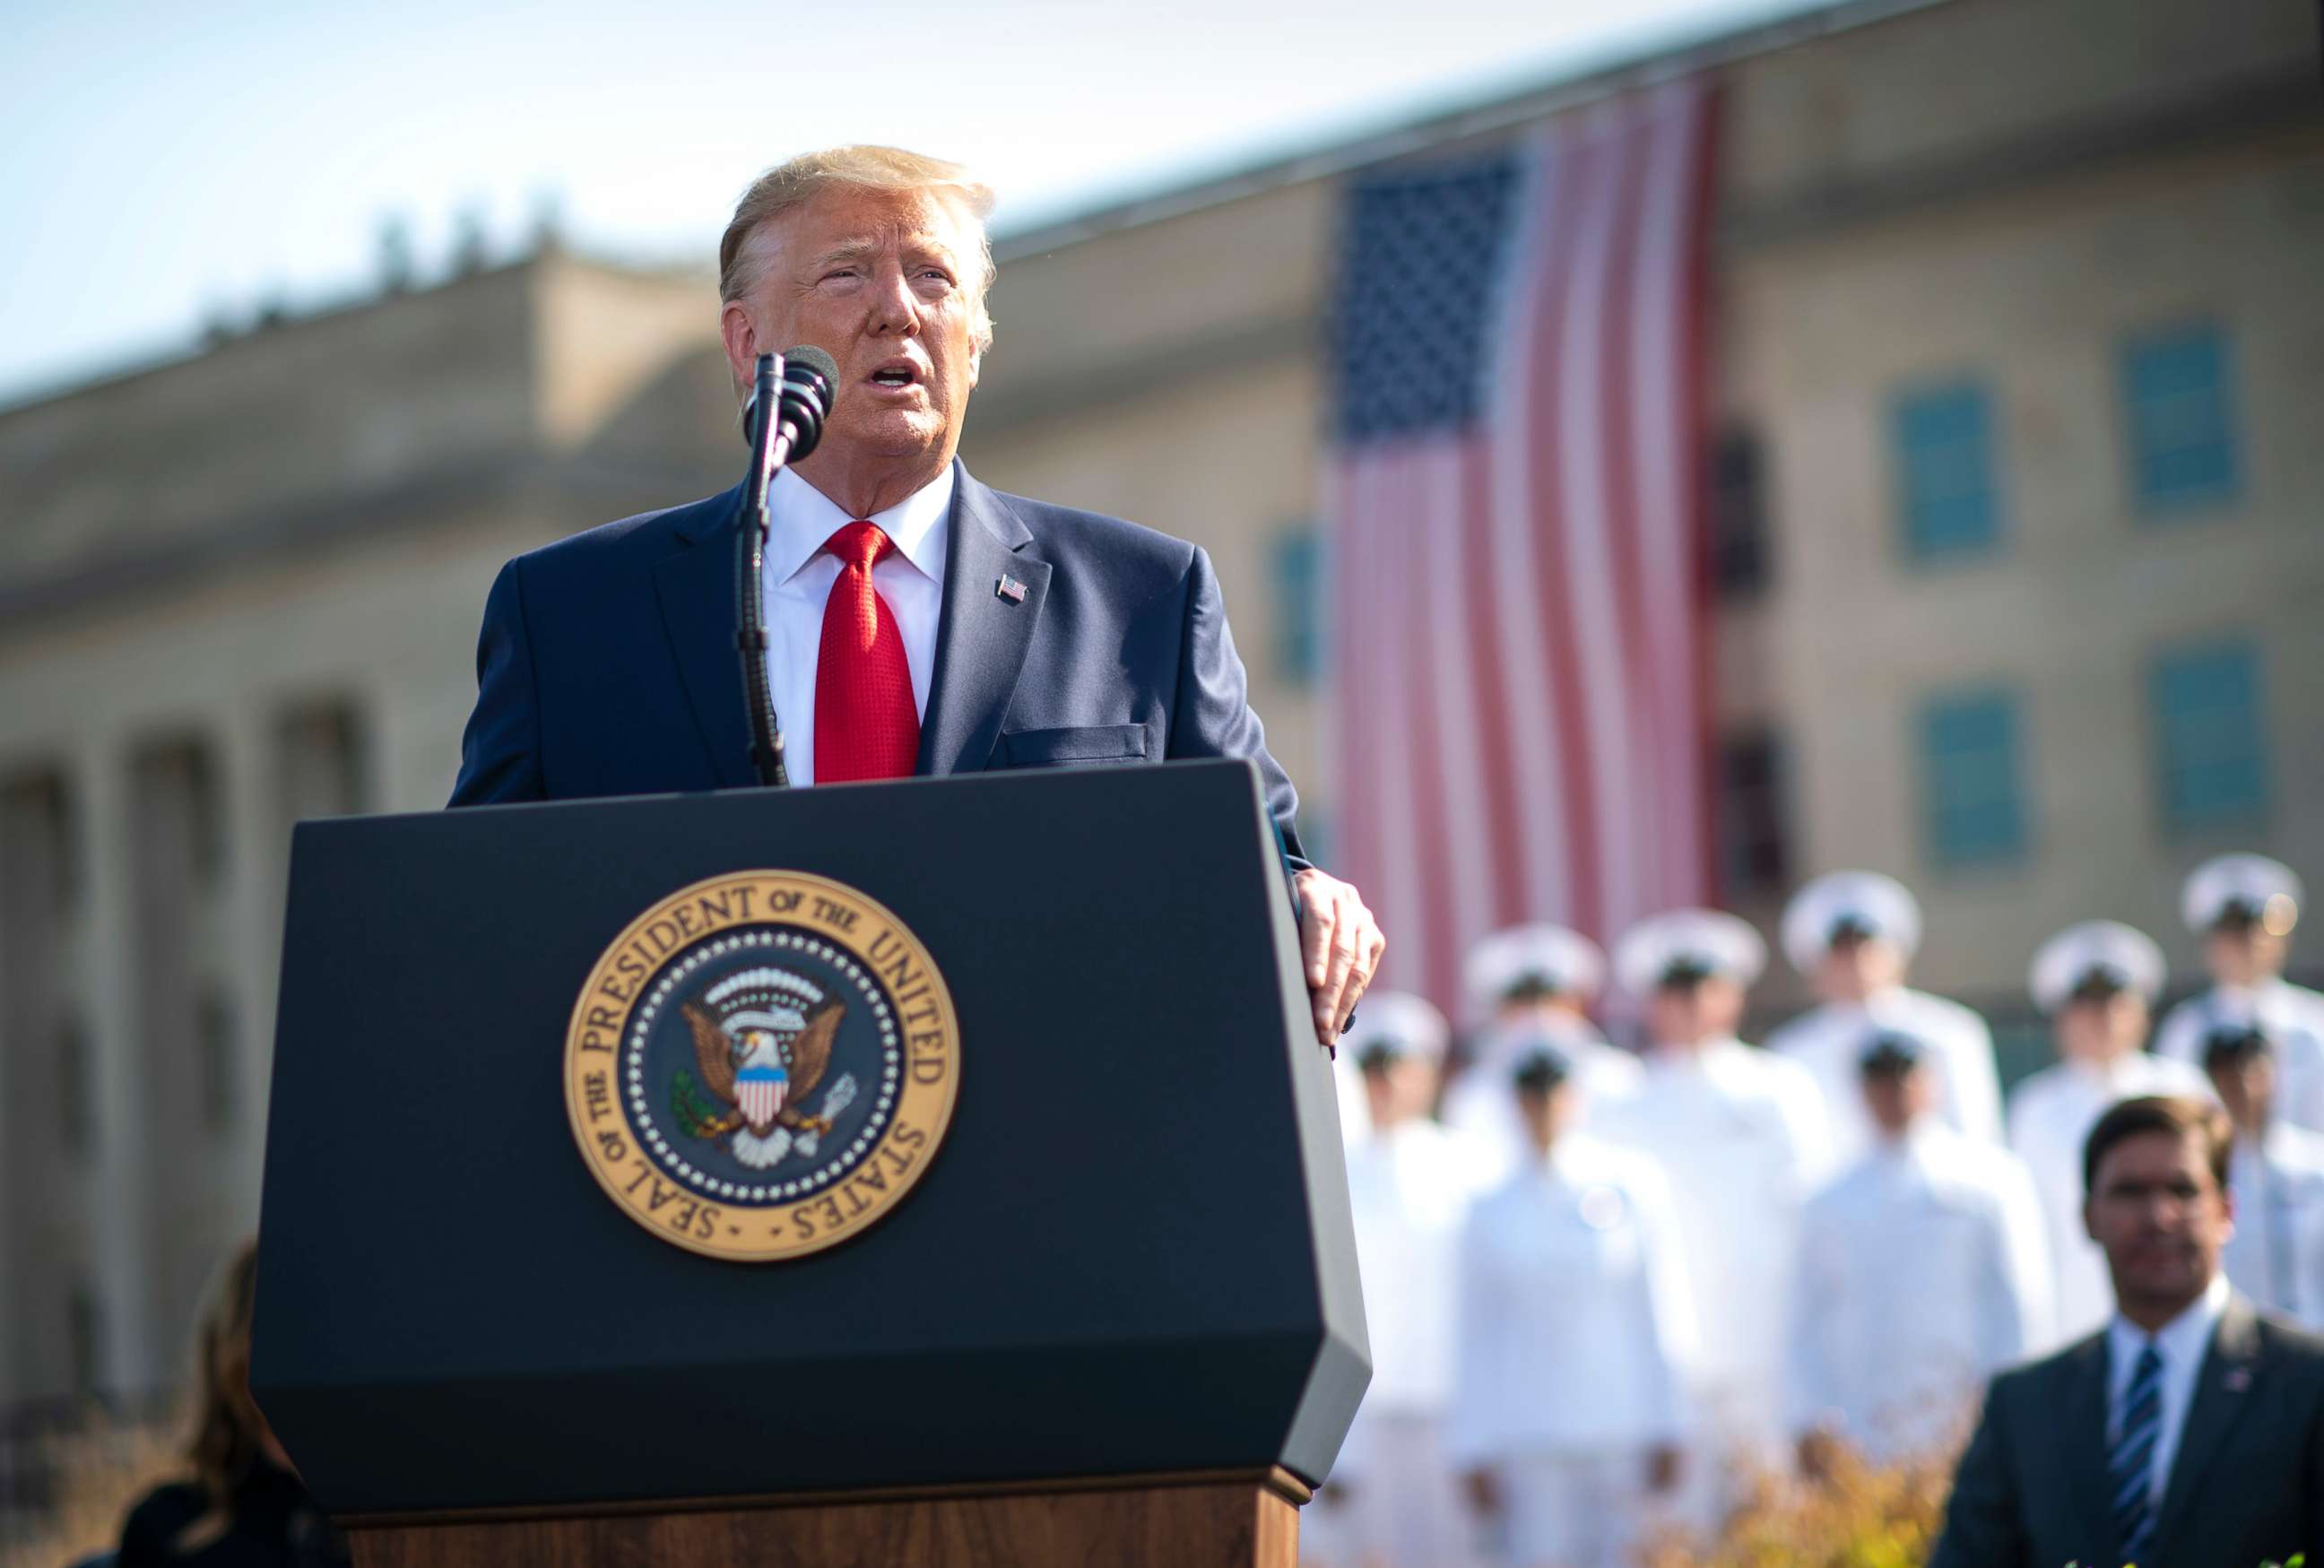 PHOTO: President Donald Trump gives a statement in front of the Pentagon during the 18th anniversary commemoration of the September 11 terrorist attacks, in Arlington, Va., Sept. 11, 2019.